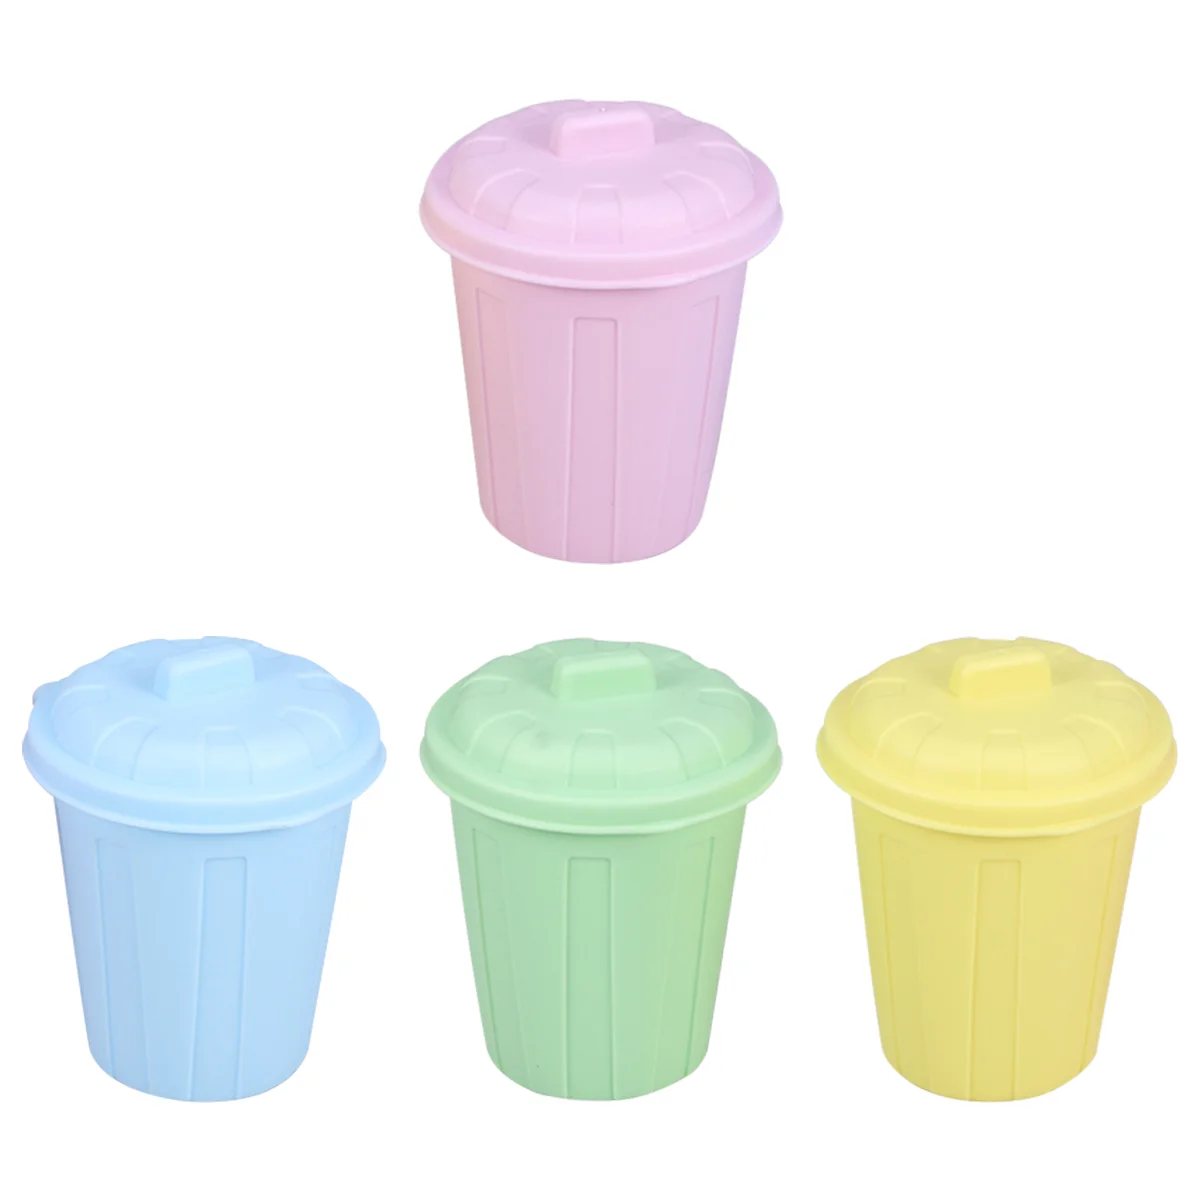 

Can Trash Mini Garbage Desktop Bin Car Office Wastevehicles Table Toy Tabletop Cans Holder Container Basket